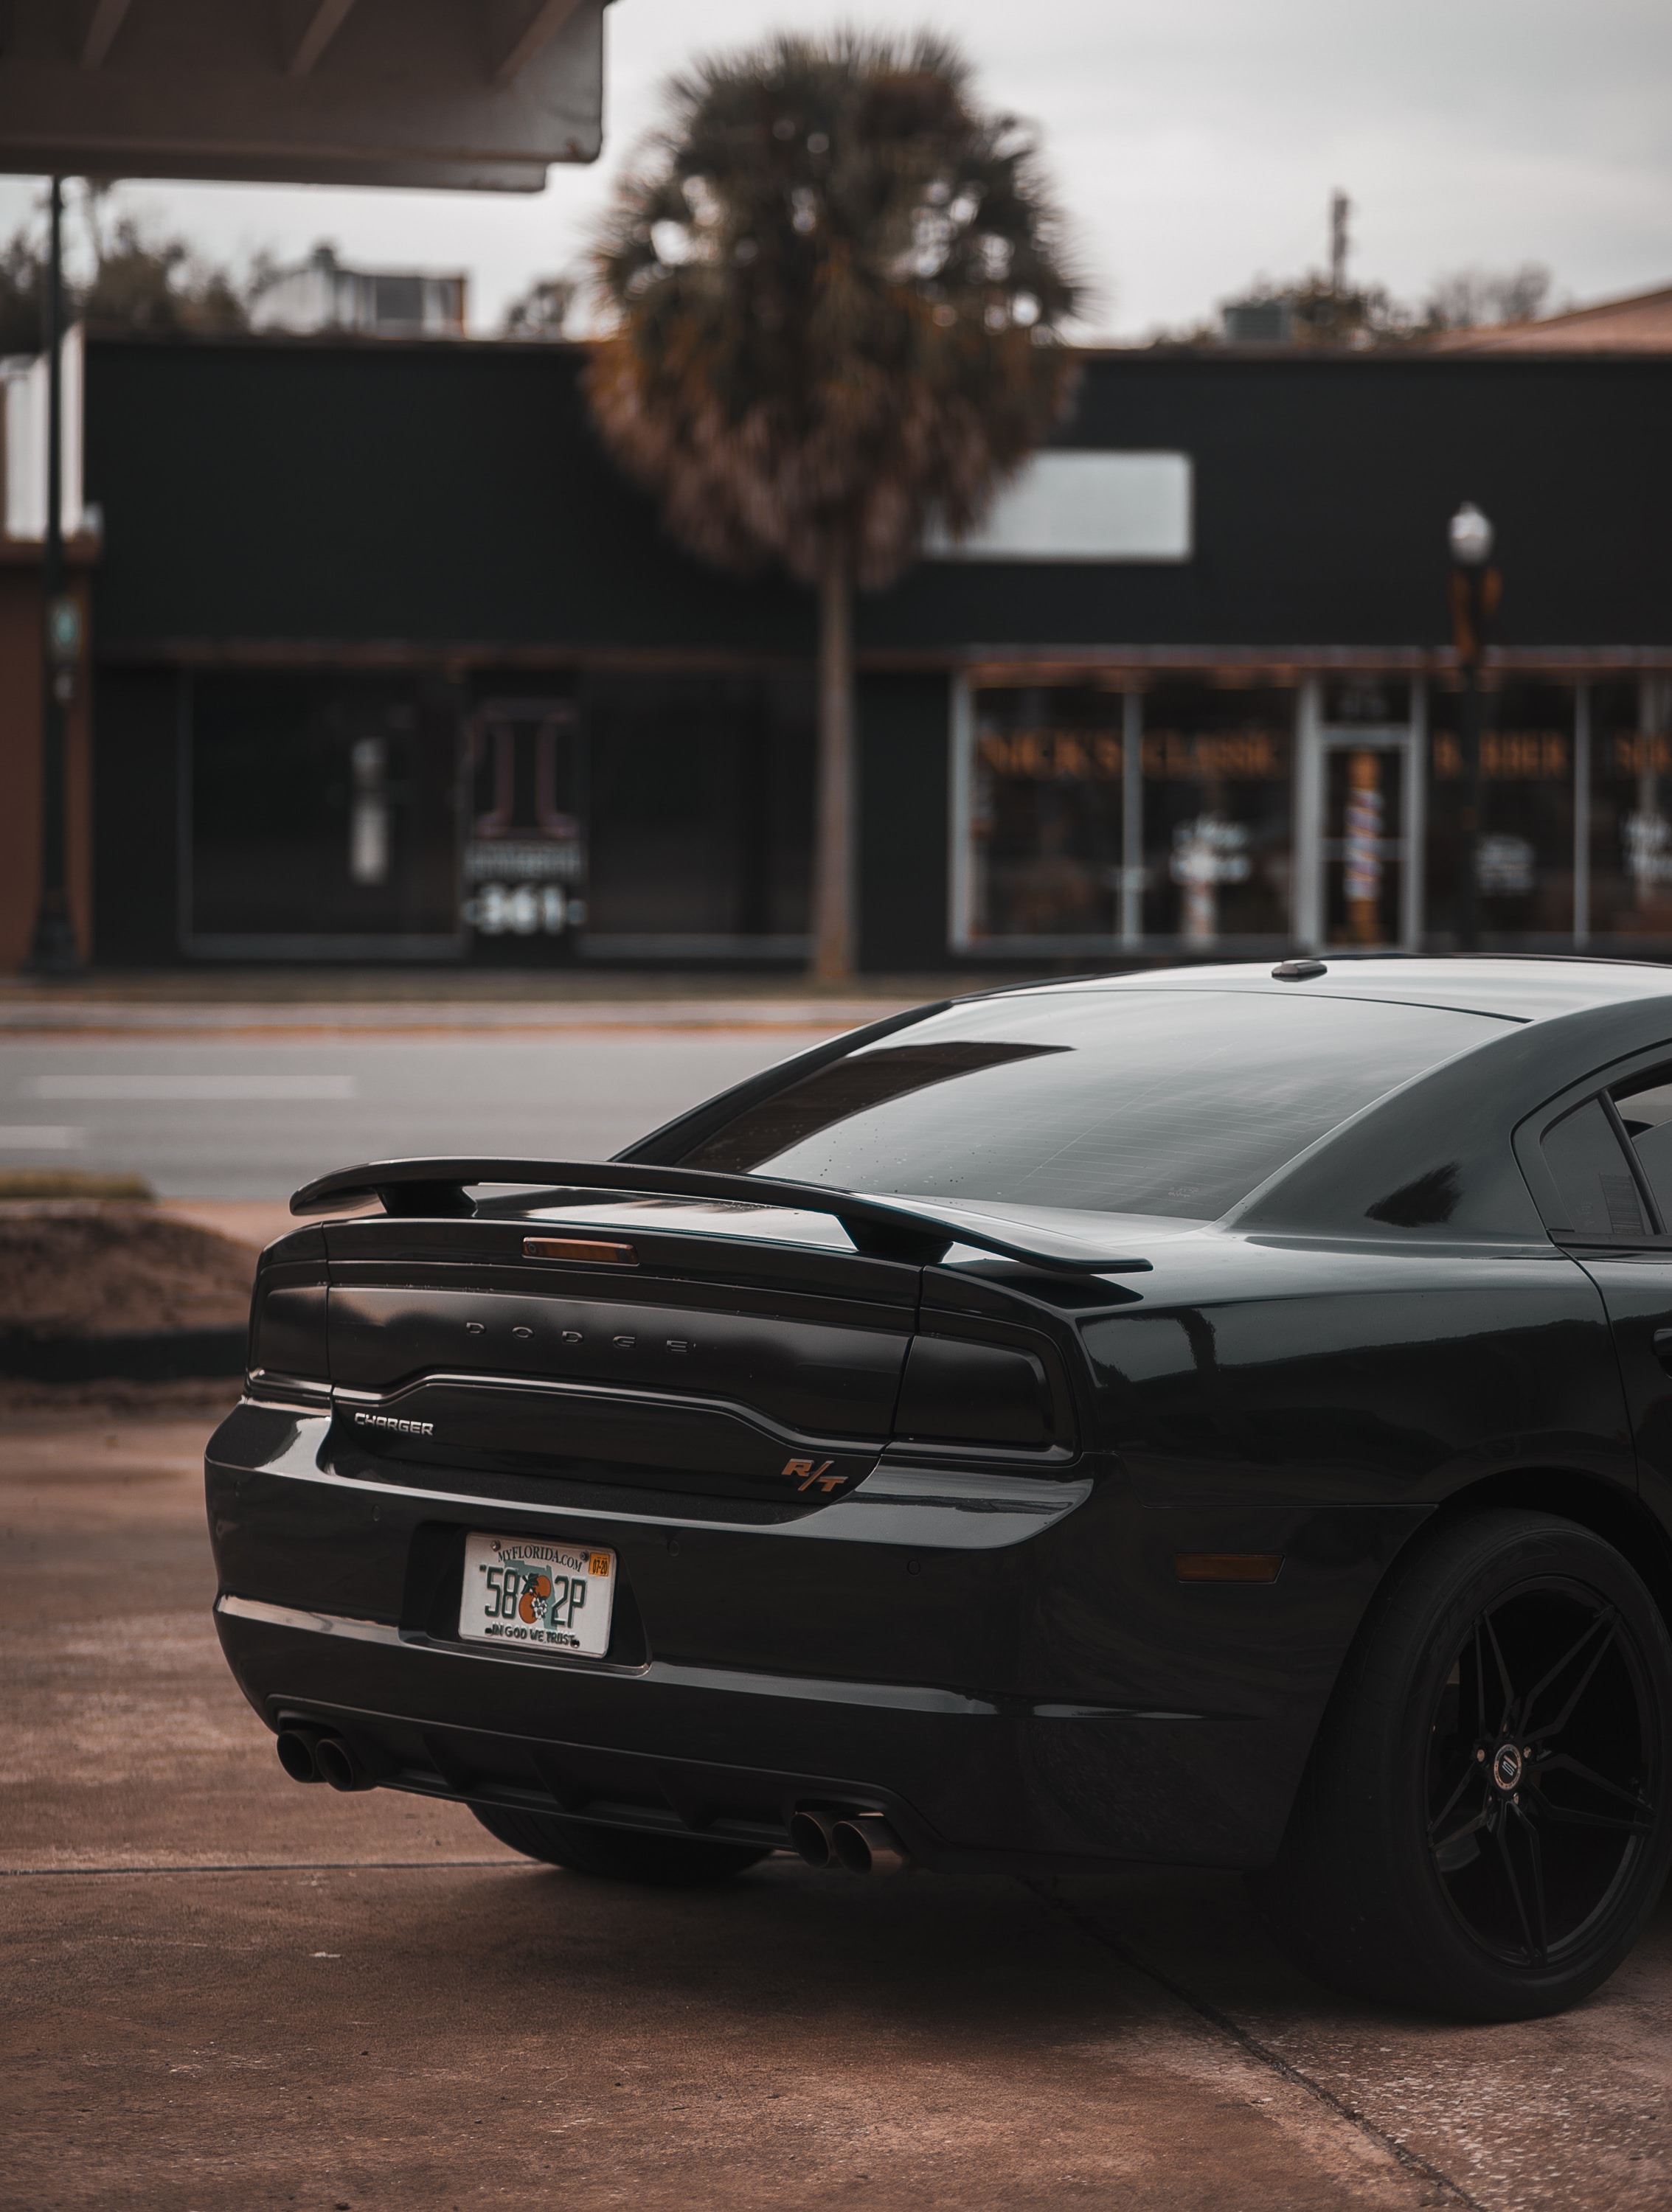 dodge charger, cars, black, car, back view, rear view wallpaper for mobile